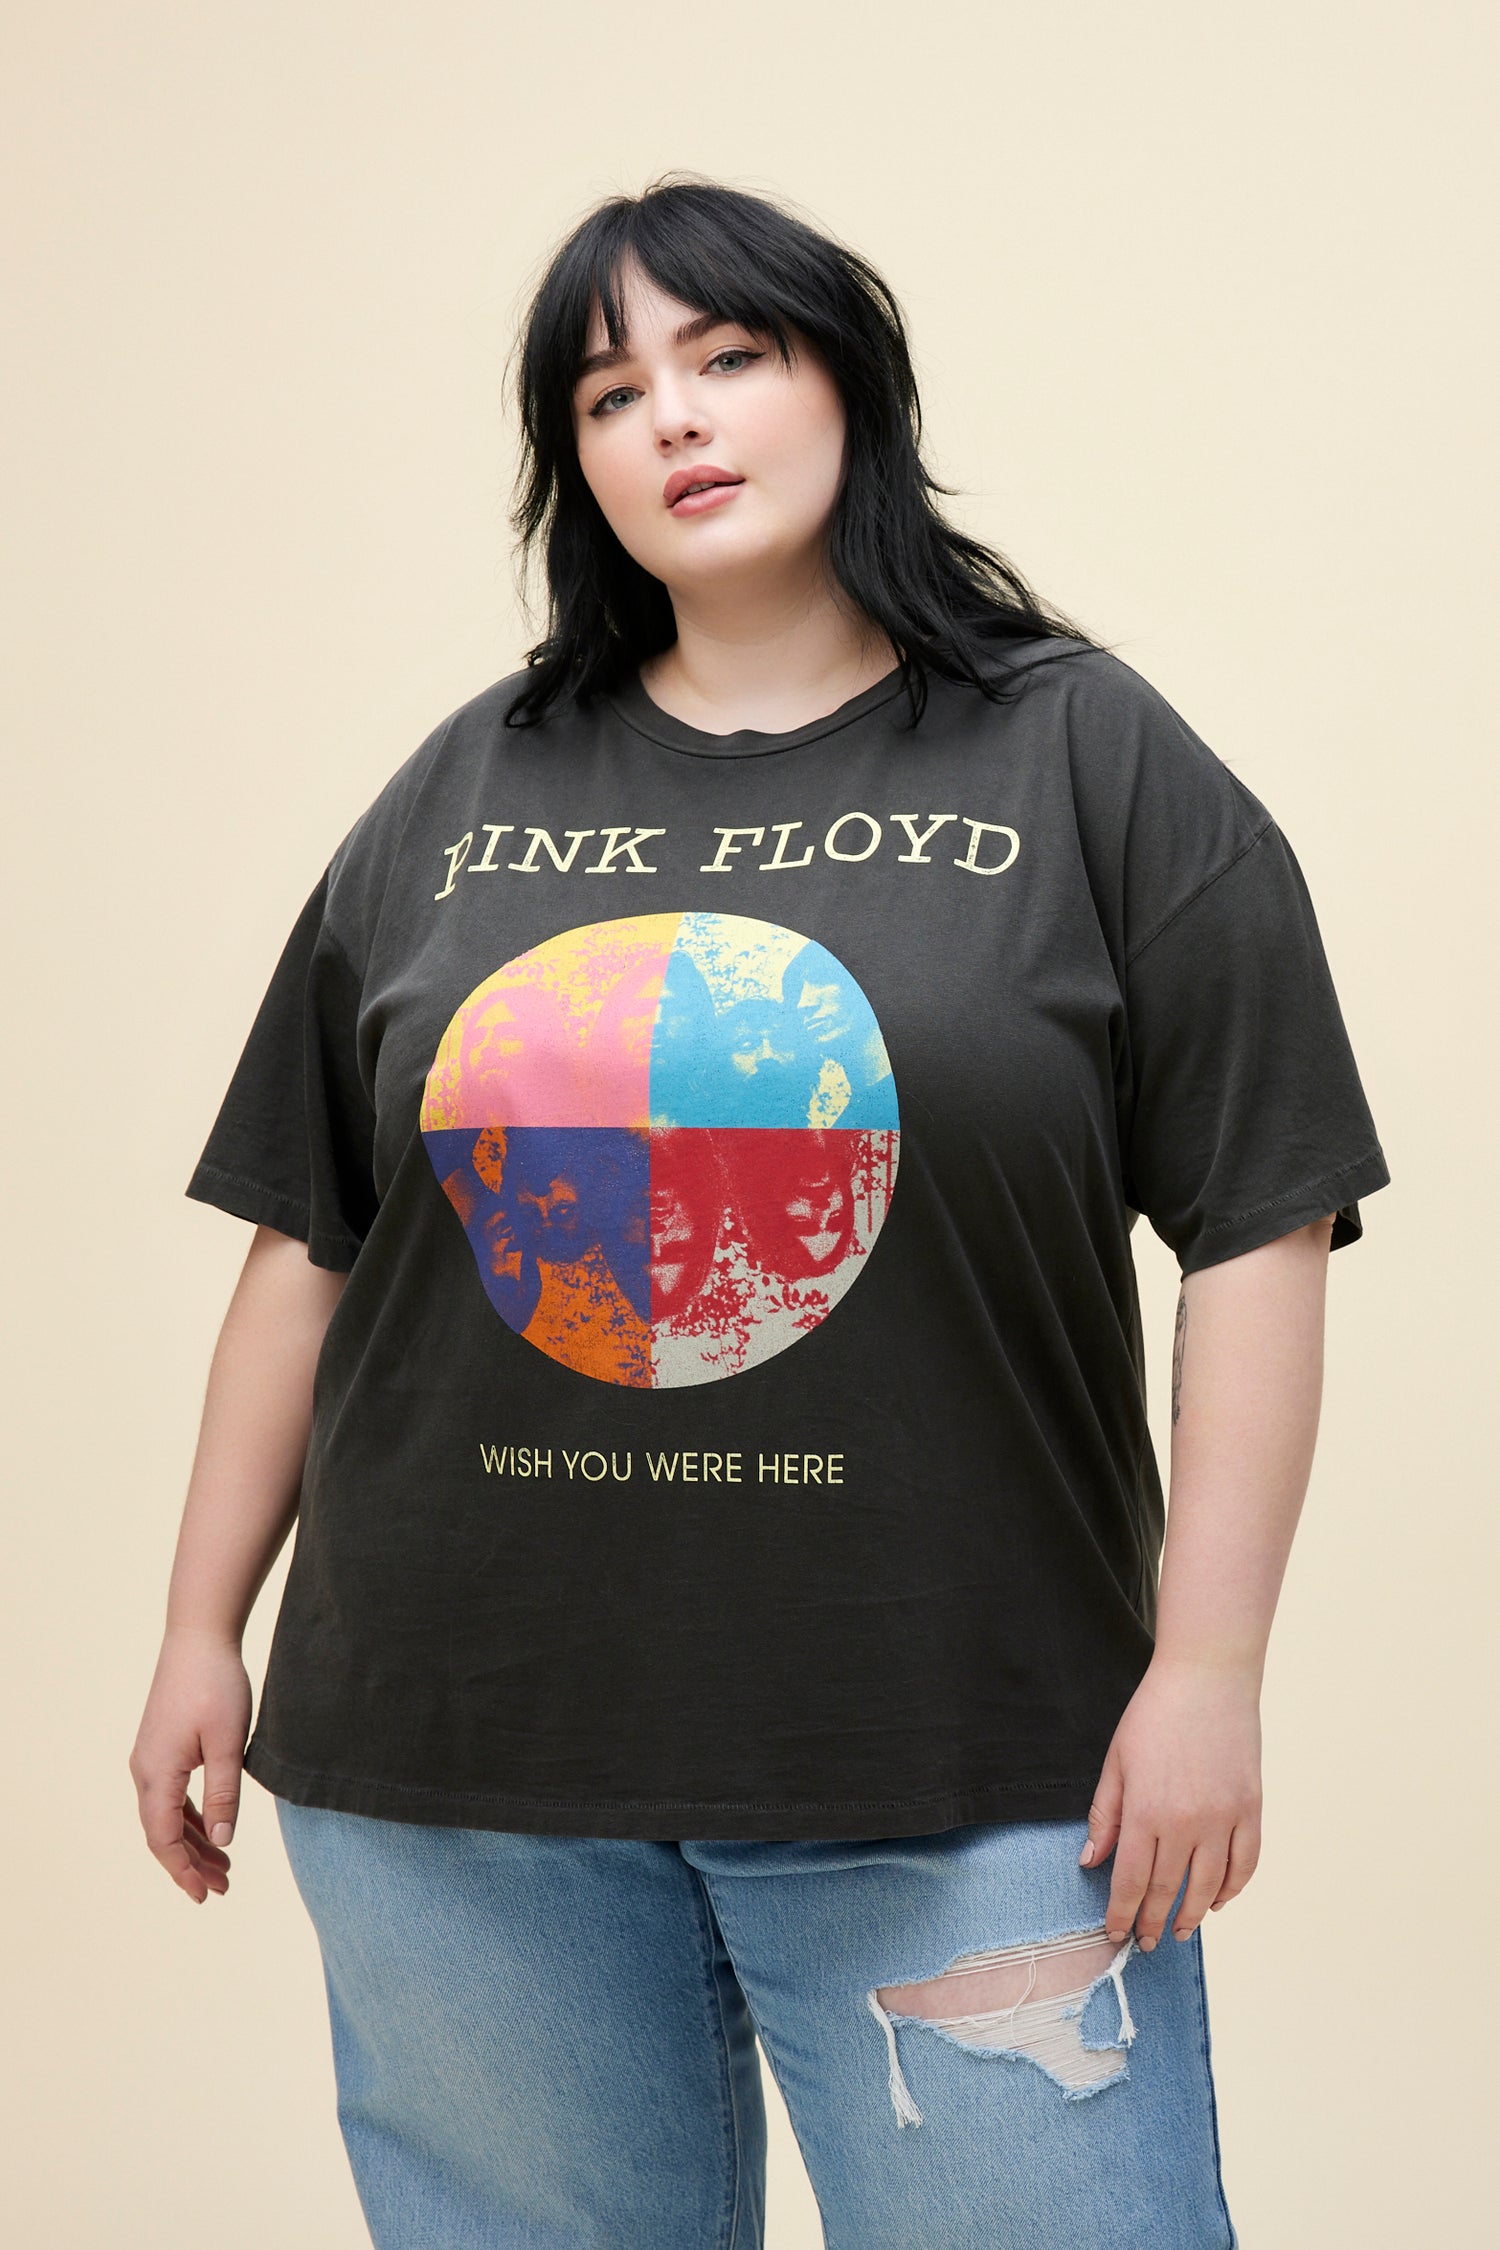 A model featuring a black tee ES designed with a distressed, multi-colored graphic image inspired by the main members of Pink Floyd stamped with "Wish you Were Here" below. 